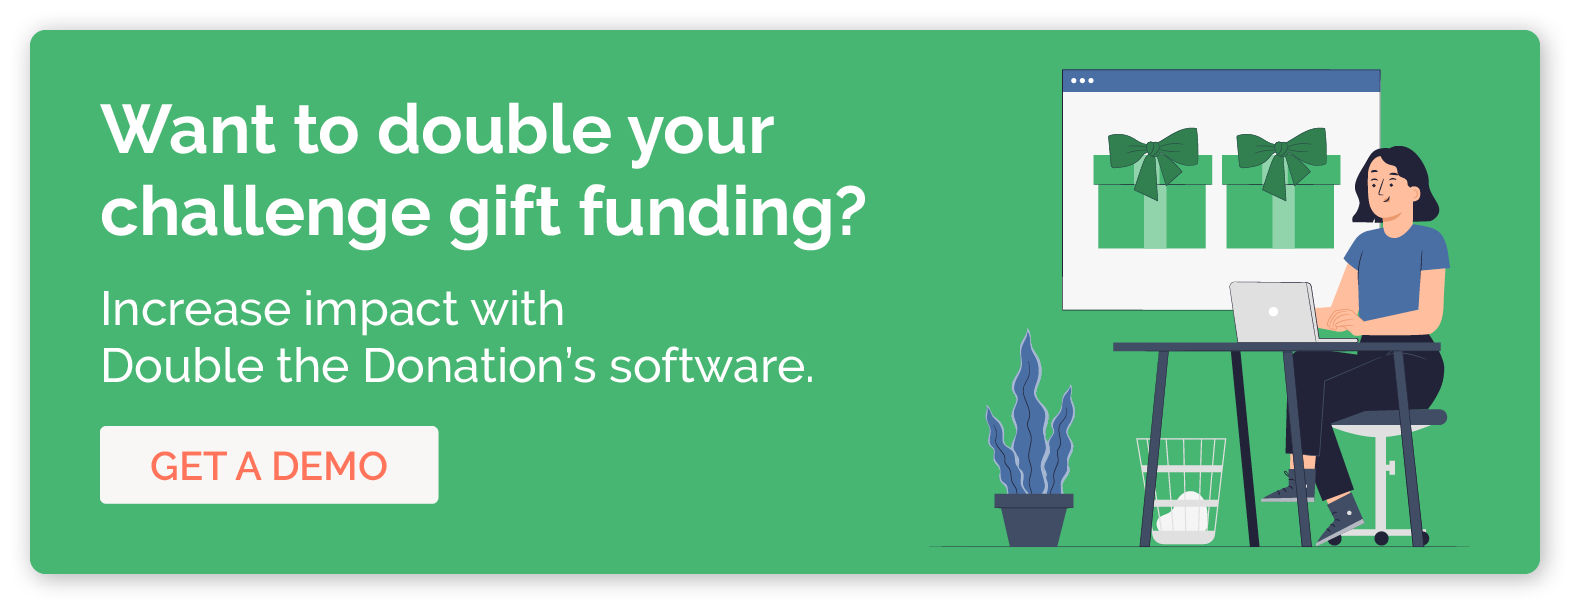 Click to get a demo of Double the Donation’s software to increase challenge gift donation impact.